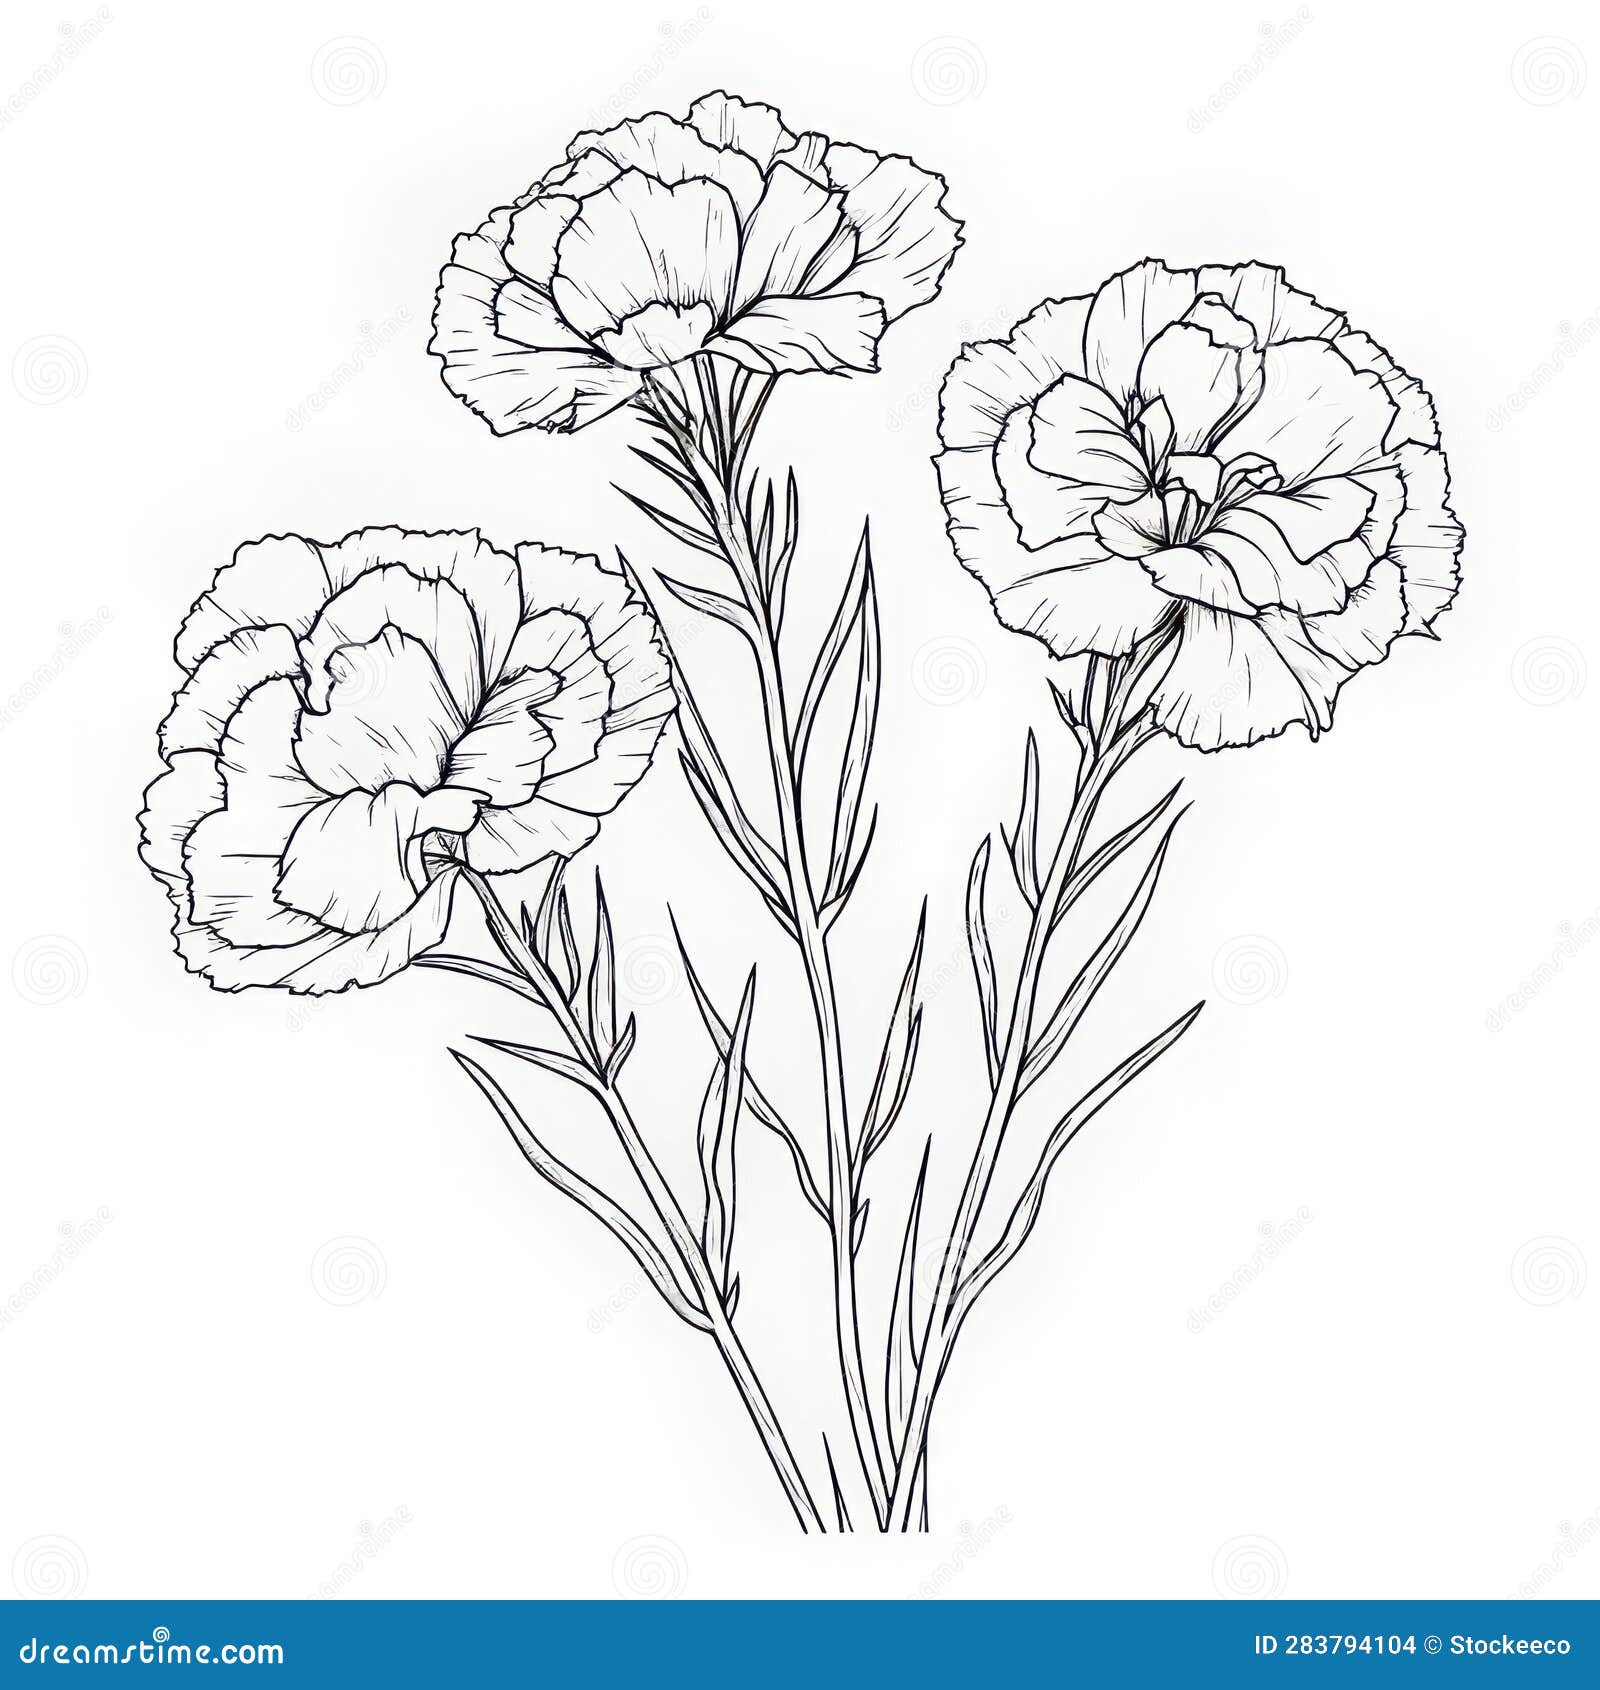 Carnation Flower Coloring Page with Detailed Botanical Illustration ...